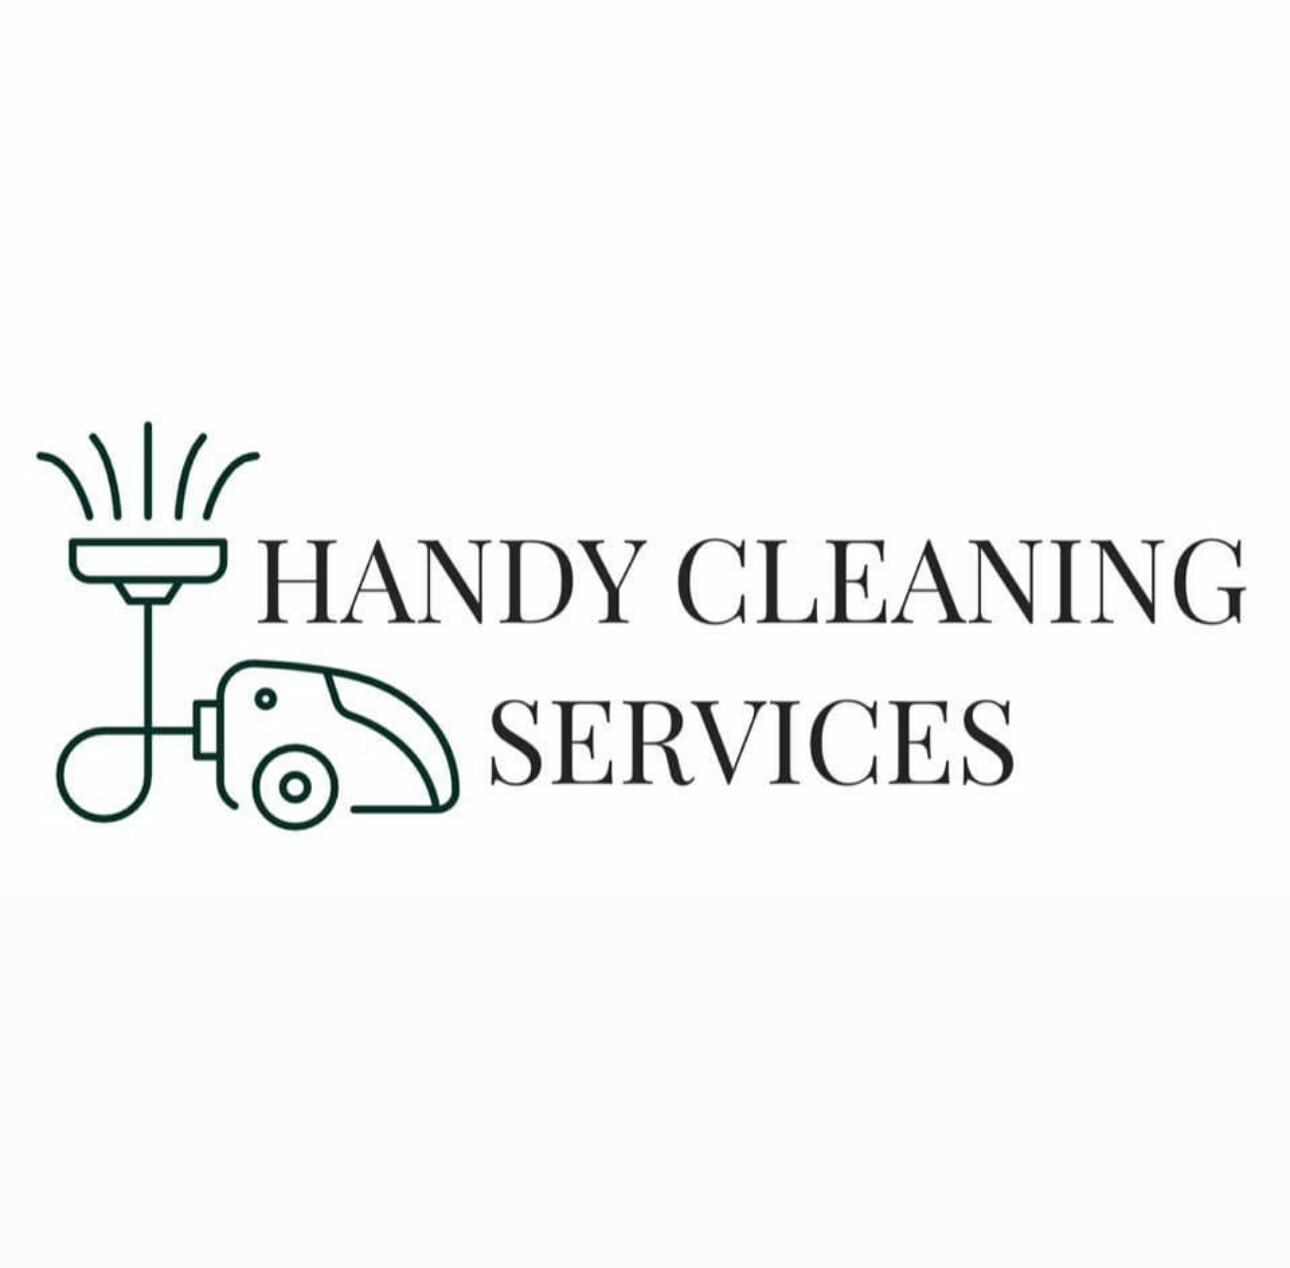 Handy Cleaning Services's logo